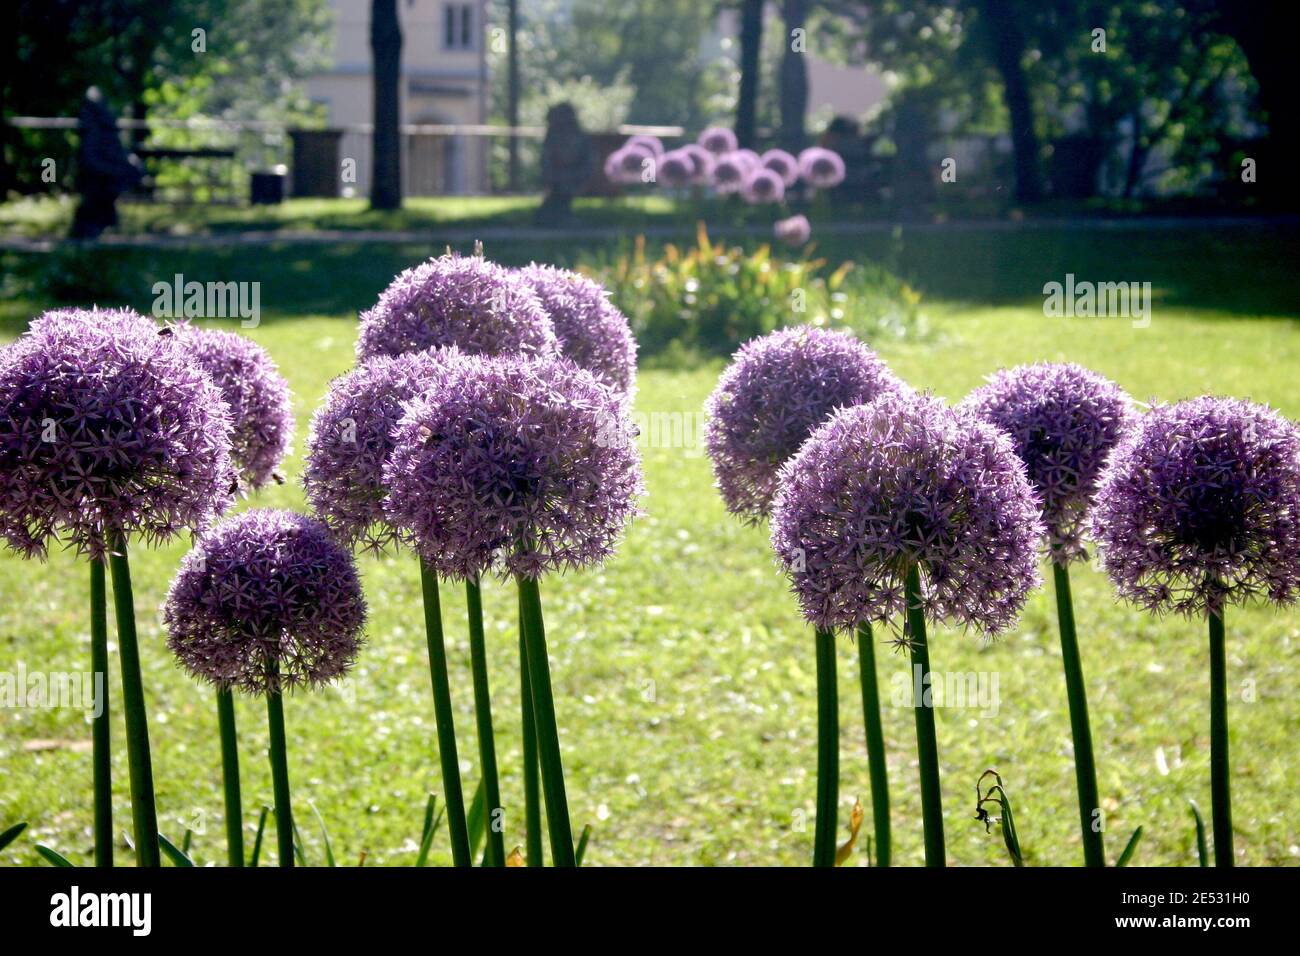 GIANT ORNAMENTAL ONION (ALLIUM) FLOWERS ARE AN ASIAN SPECIES OF ONION NATIVE TO CENTRAL AND SOUTH WESTERN ASIA. Stock Photo